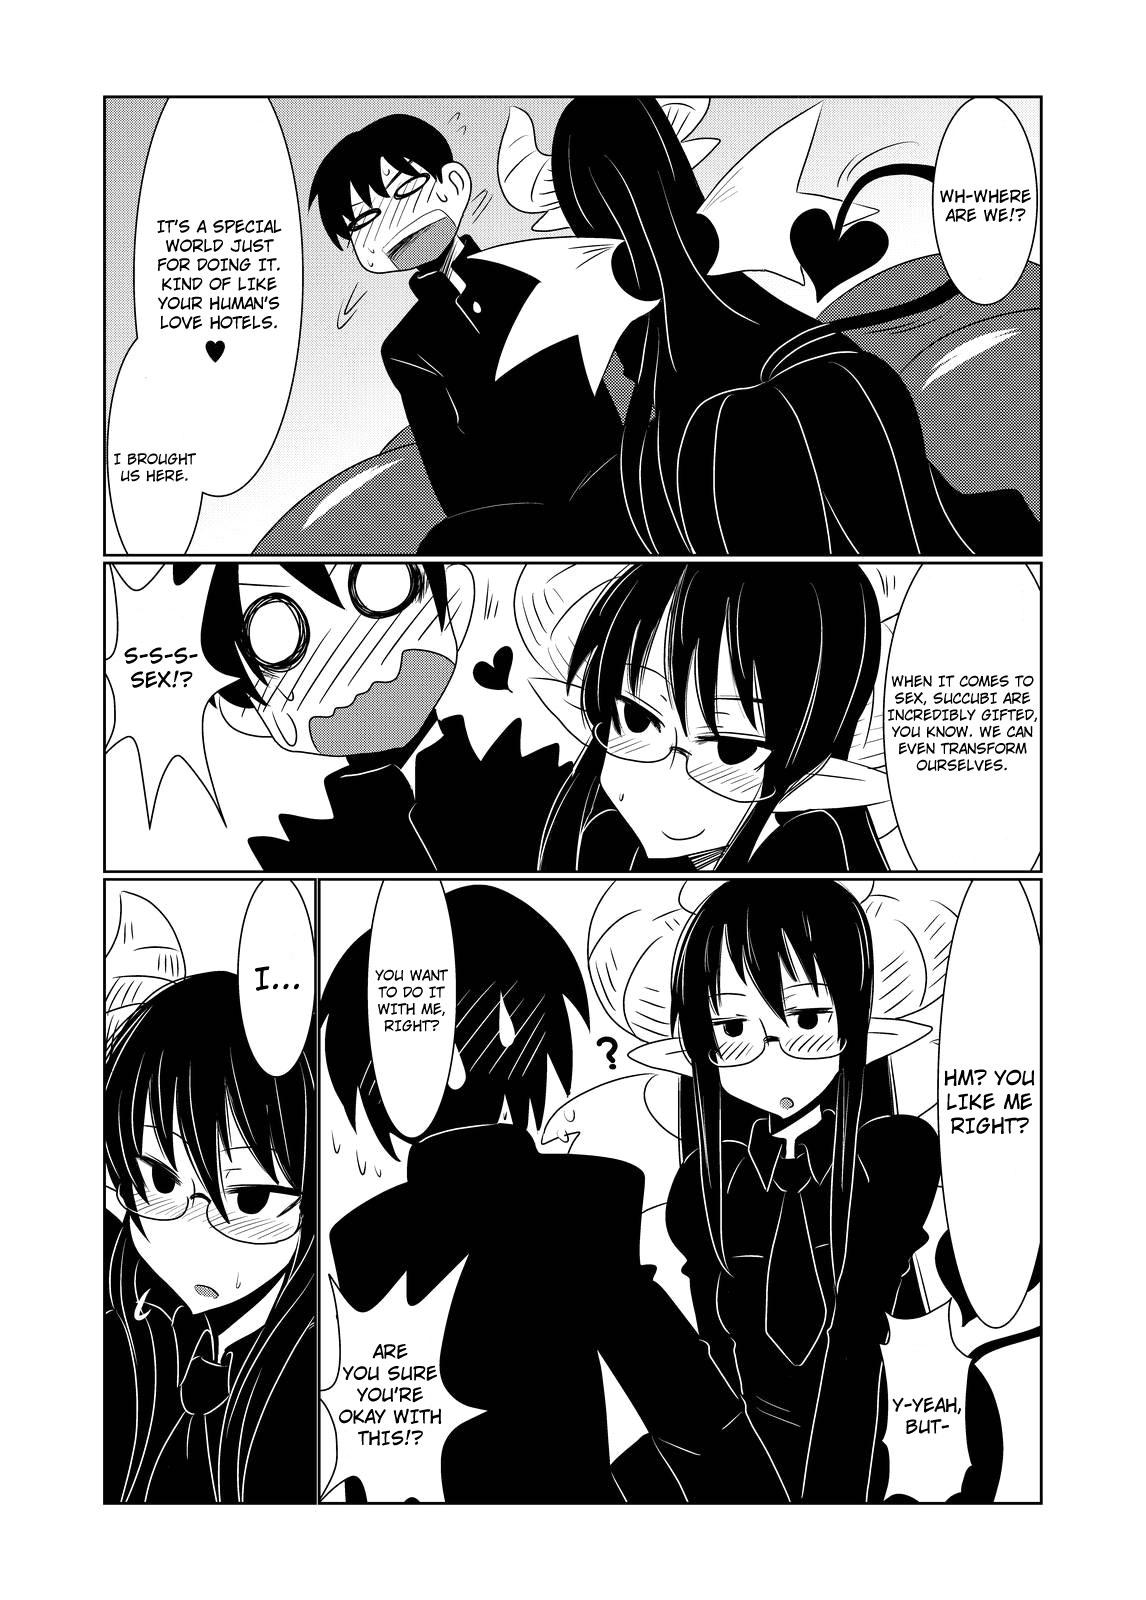 Petite Teen JK Succubus no Renai Jijou. | Thoughts on Love by a Female High School Succubus Free Amatuer Porn - Page 8